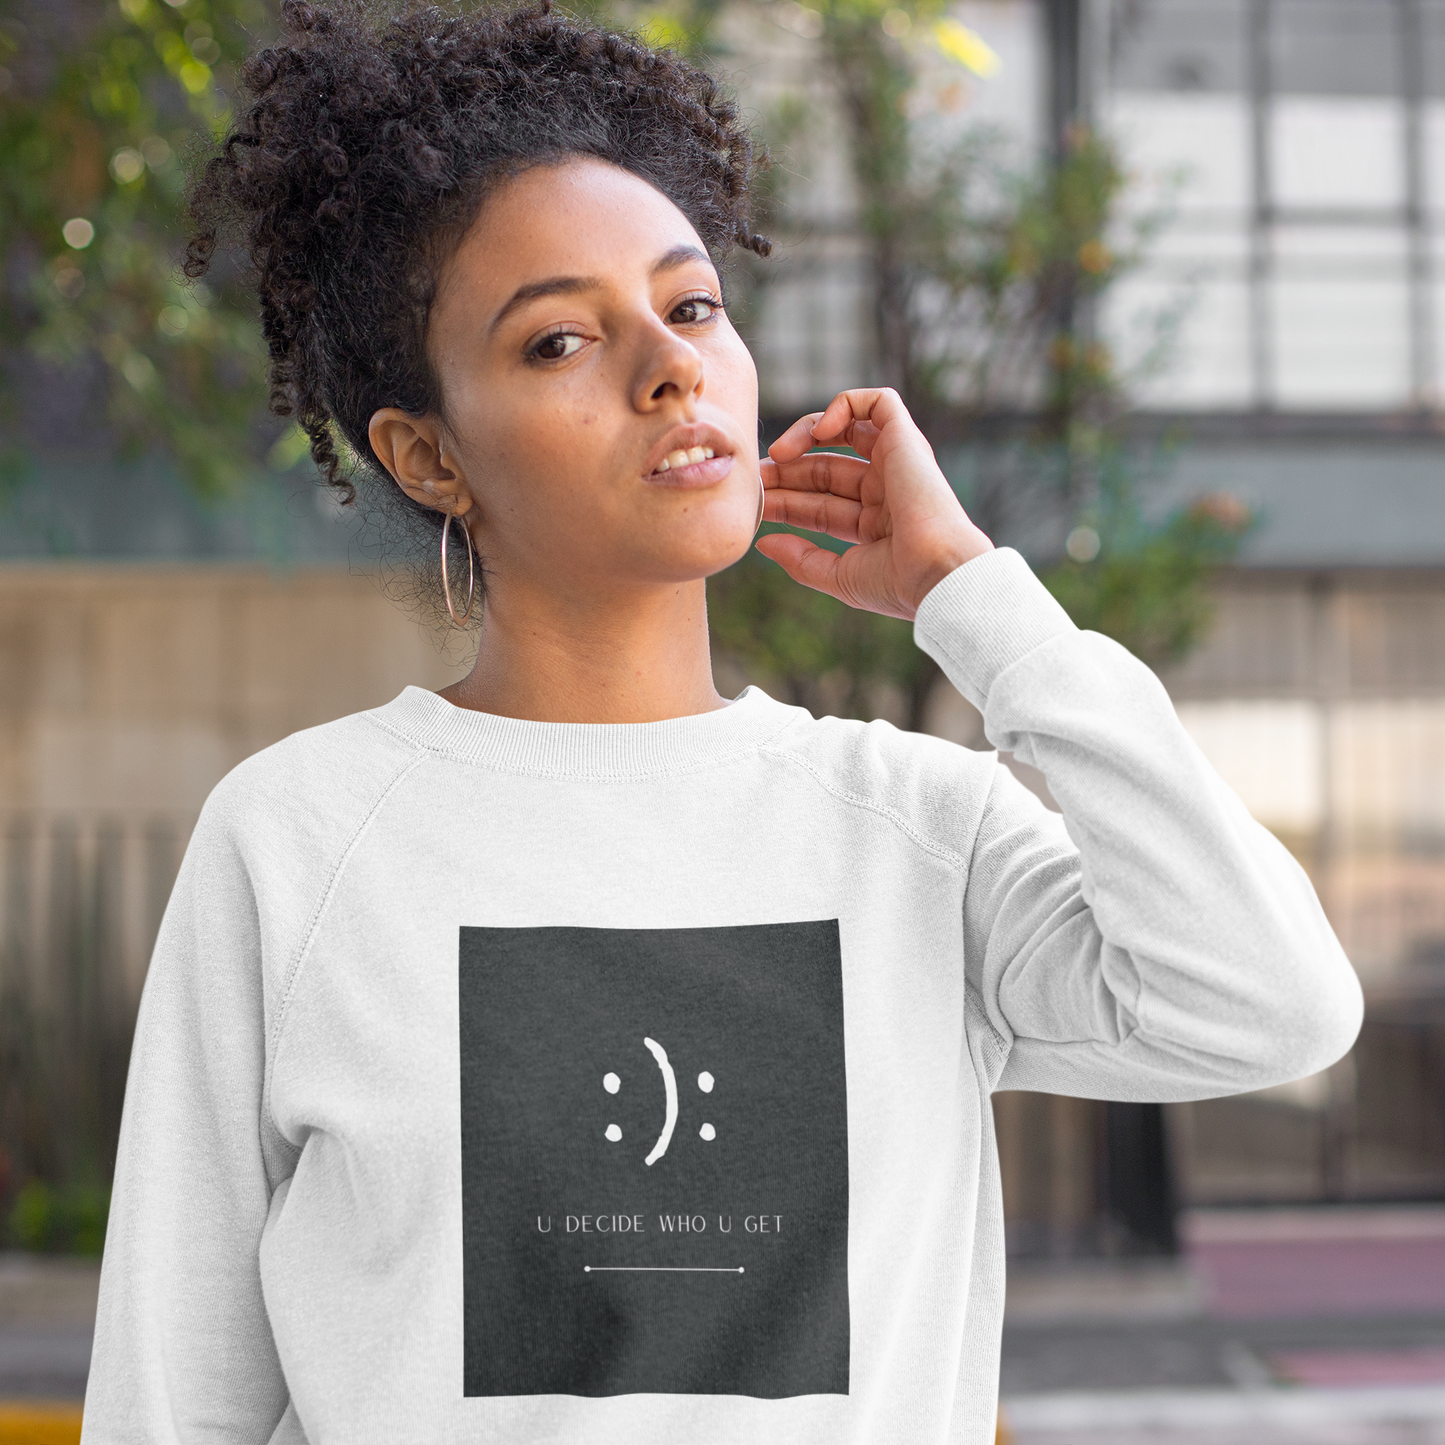 The you decide who you get smiley face crewneck sweatshirt is perfect for people who can't hide their emotions on their face.  This smiley face will let people know up front your personality in a fun and sassy way.  The edgy modern graphic will fit easily into your stylish wardrobe!